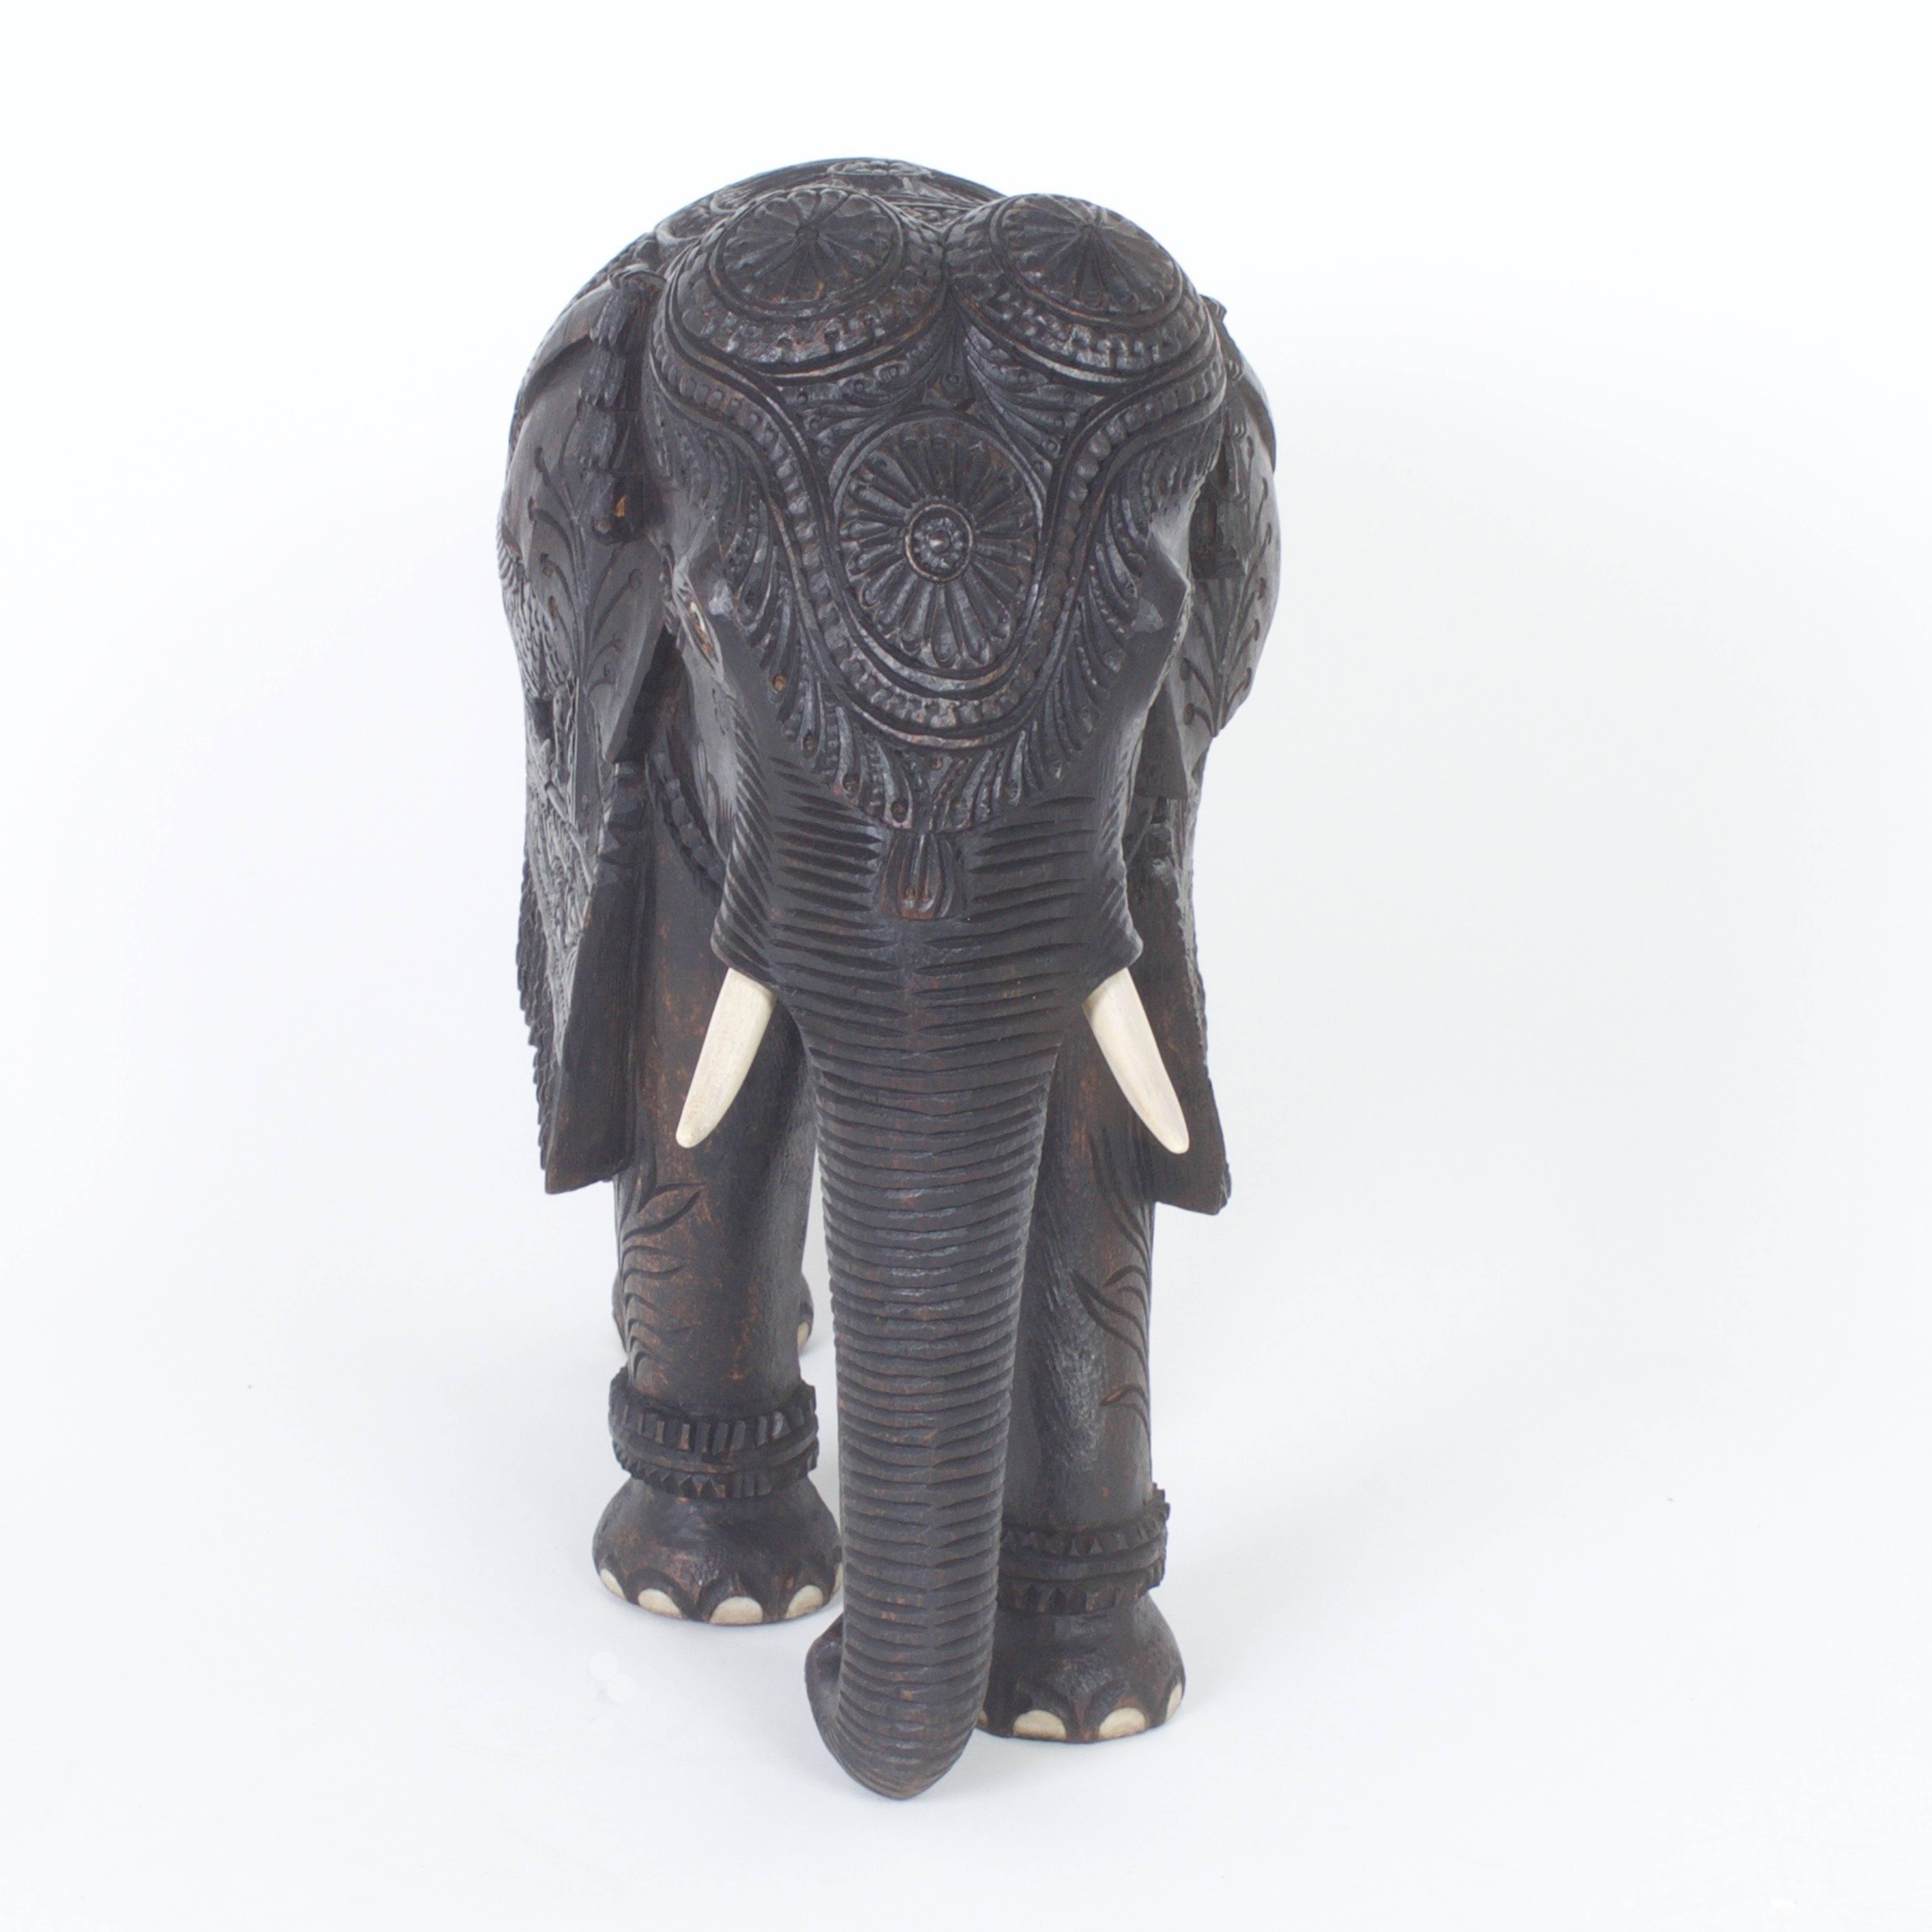 Antique Anglo-Indian elephant, expertly carved from tropical hardwood. This majestic animal is decked out in an elaborate wardrobe that features mythological phoenix birds on each side. There is an amusing good vibe about this piece that has been